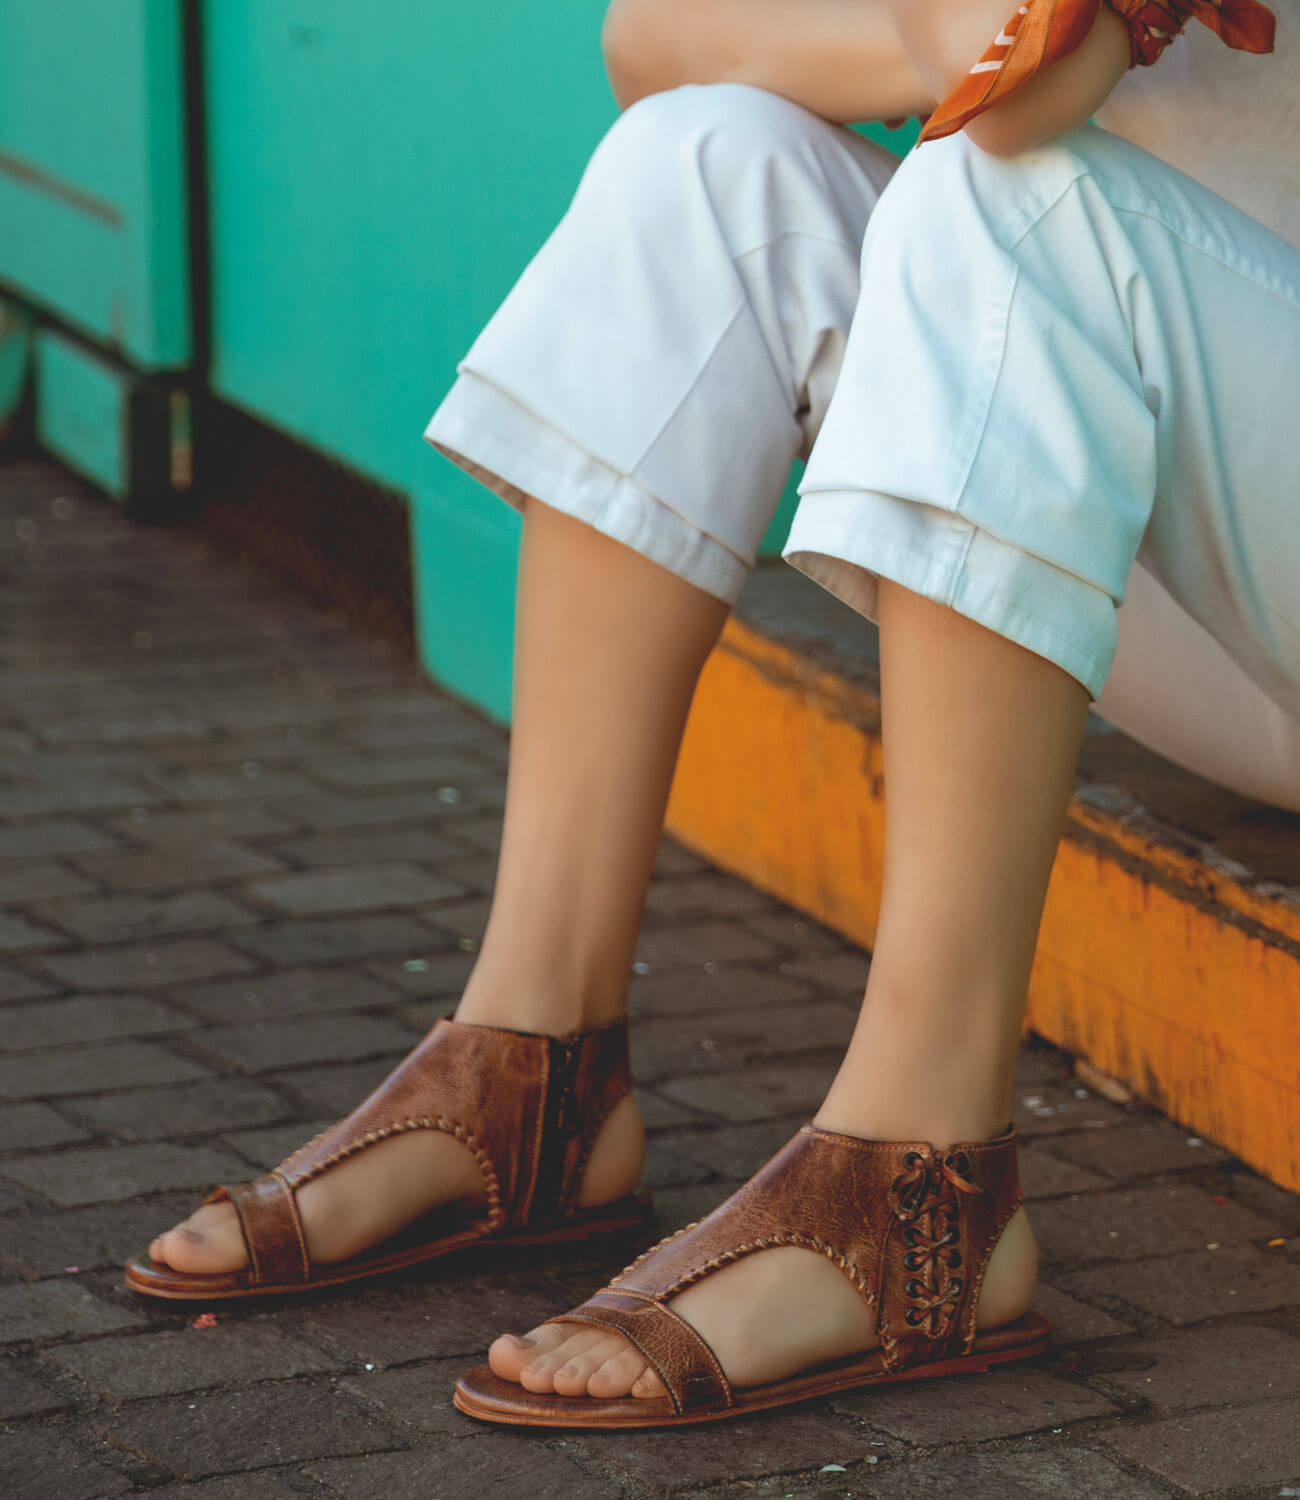 A woman is sitting on a bench wearing Bed Stu sandals.